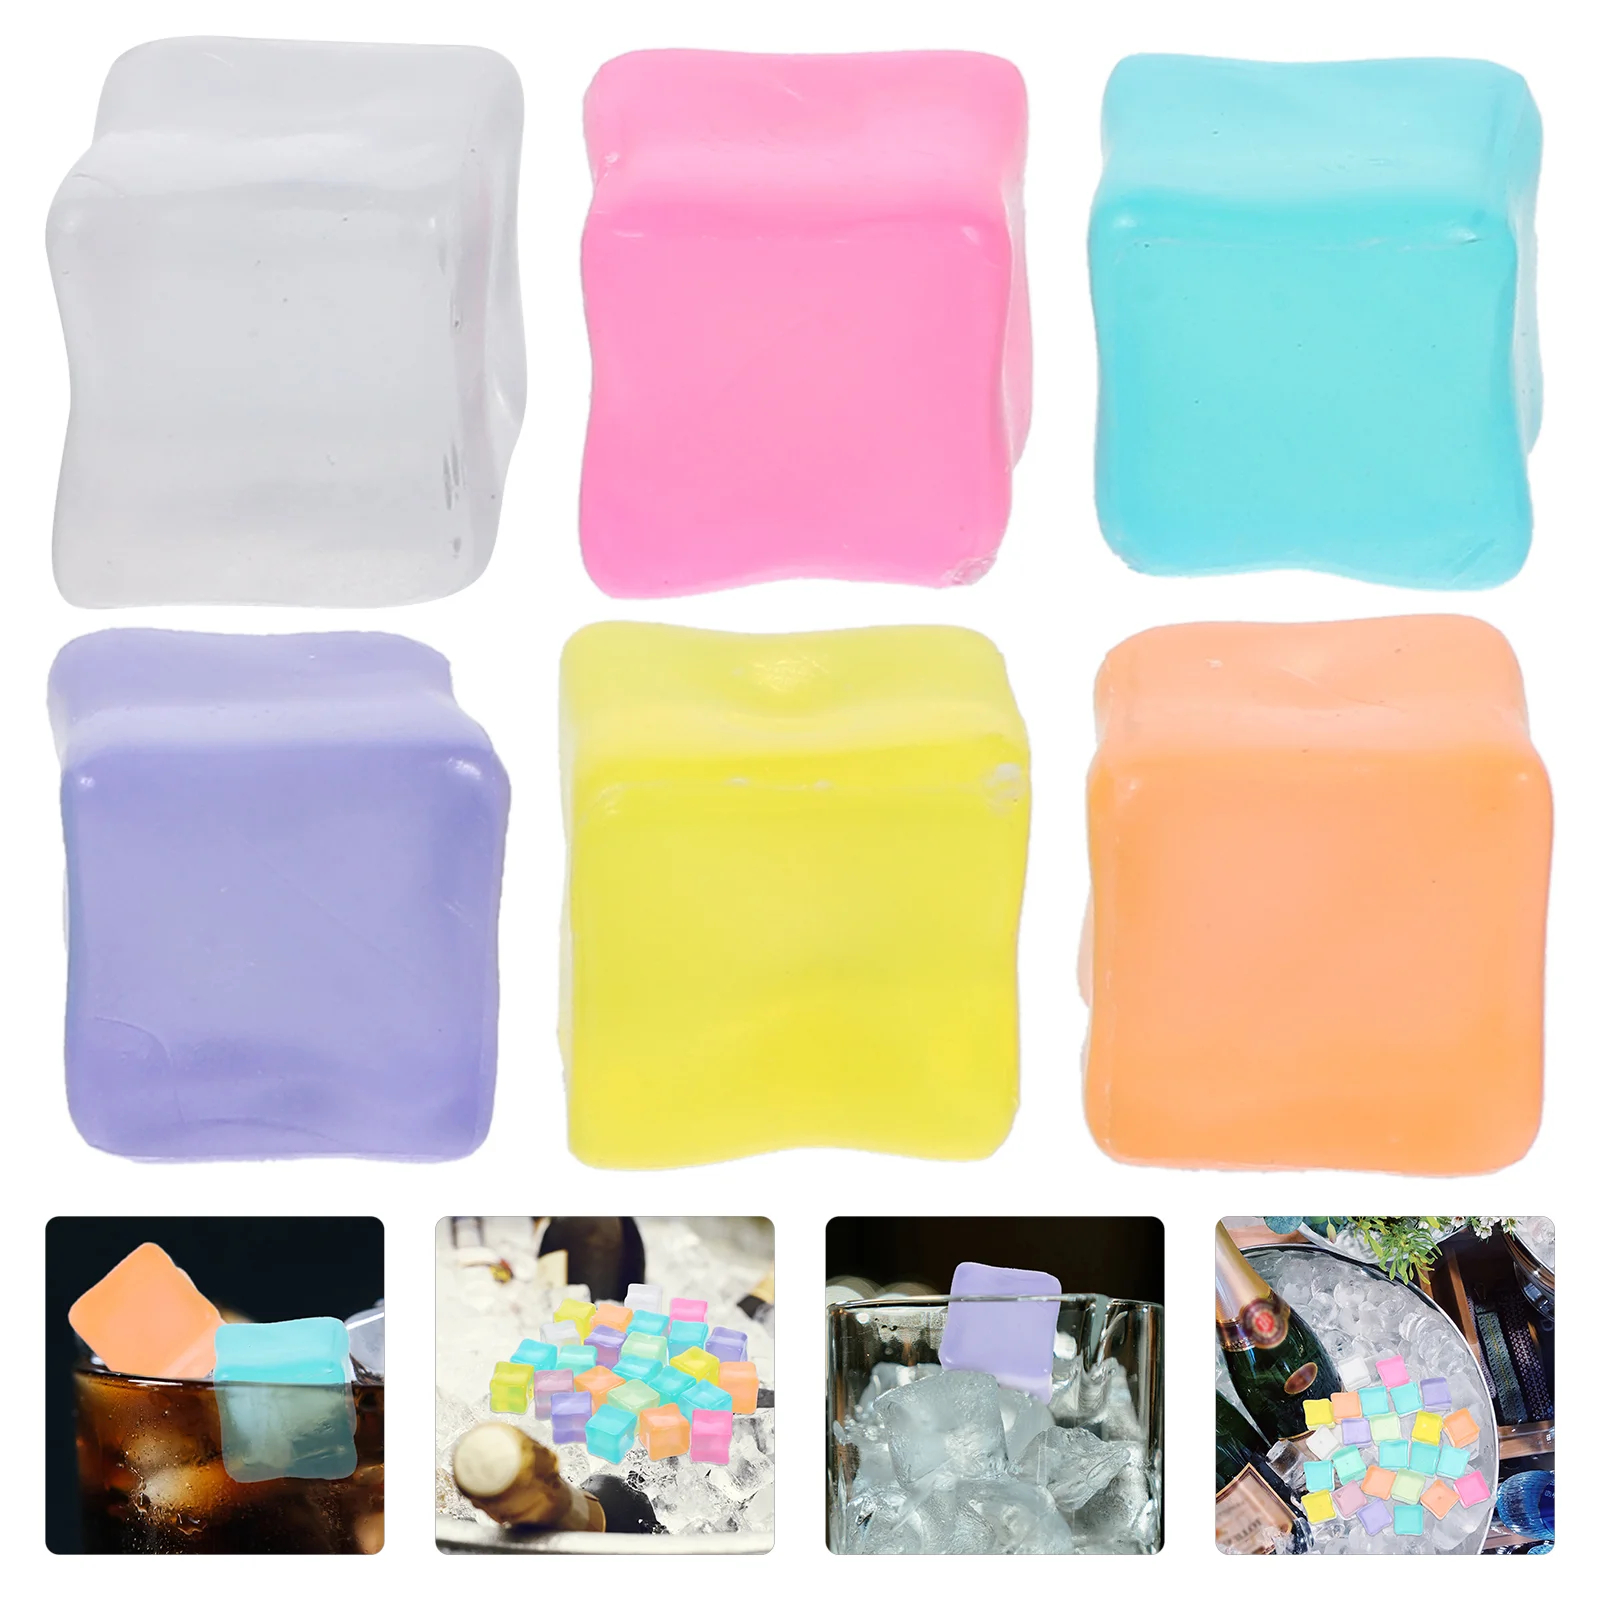 

Reusable Light Up Reusable Ice Cubes Washable Non-Melting Acrylic Light Up Reusable Ice Cubes For Drinks Beverage Glow In